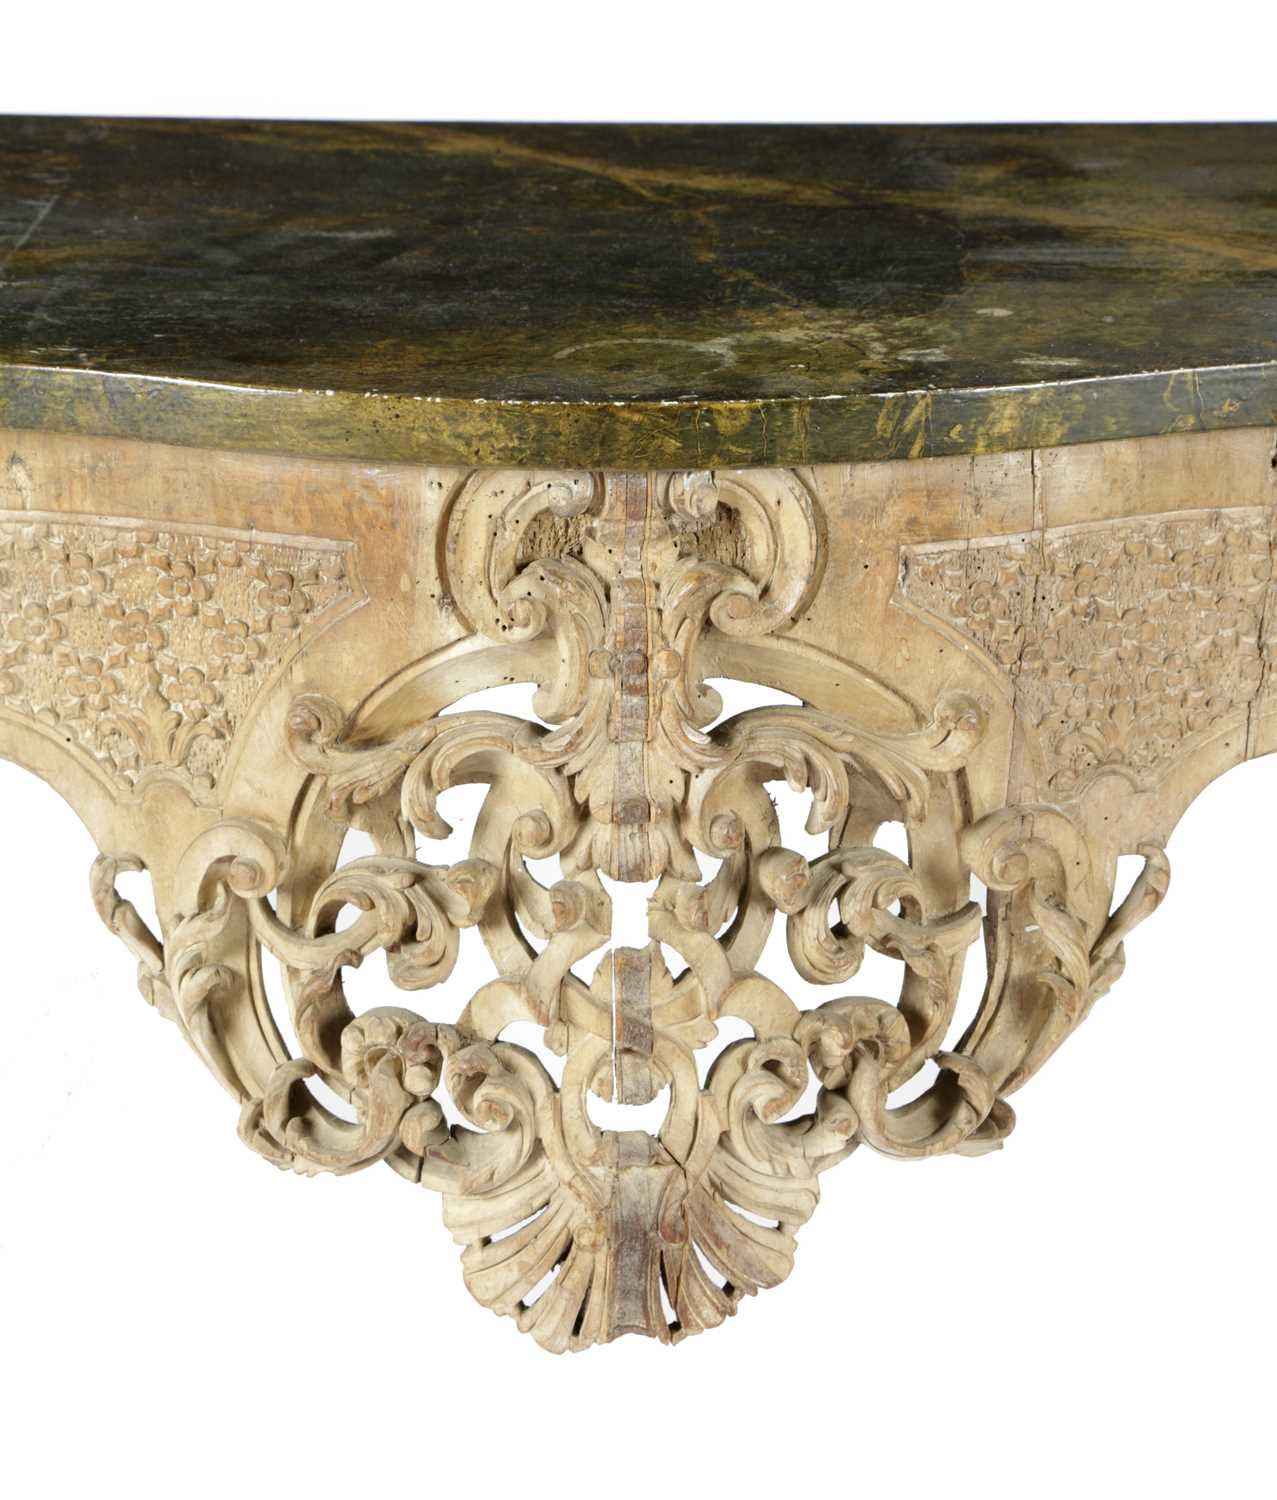 A ROCOCO CARVED WALNUT CONSOLE TABLE POSSIBLY GERMAN OR ITALIAN, 18TH CENTURY AND LATER the later - Image 5 of 6